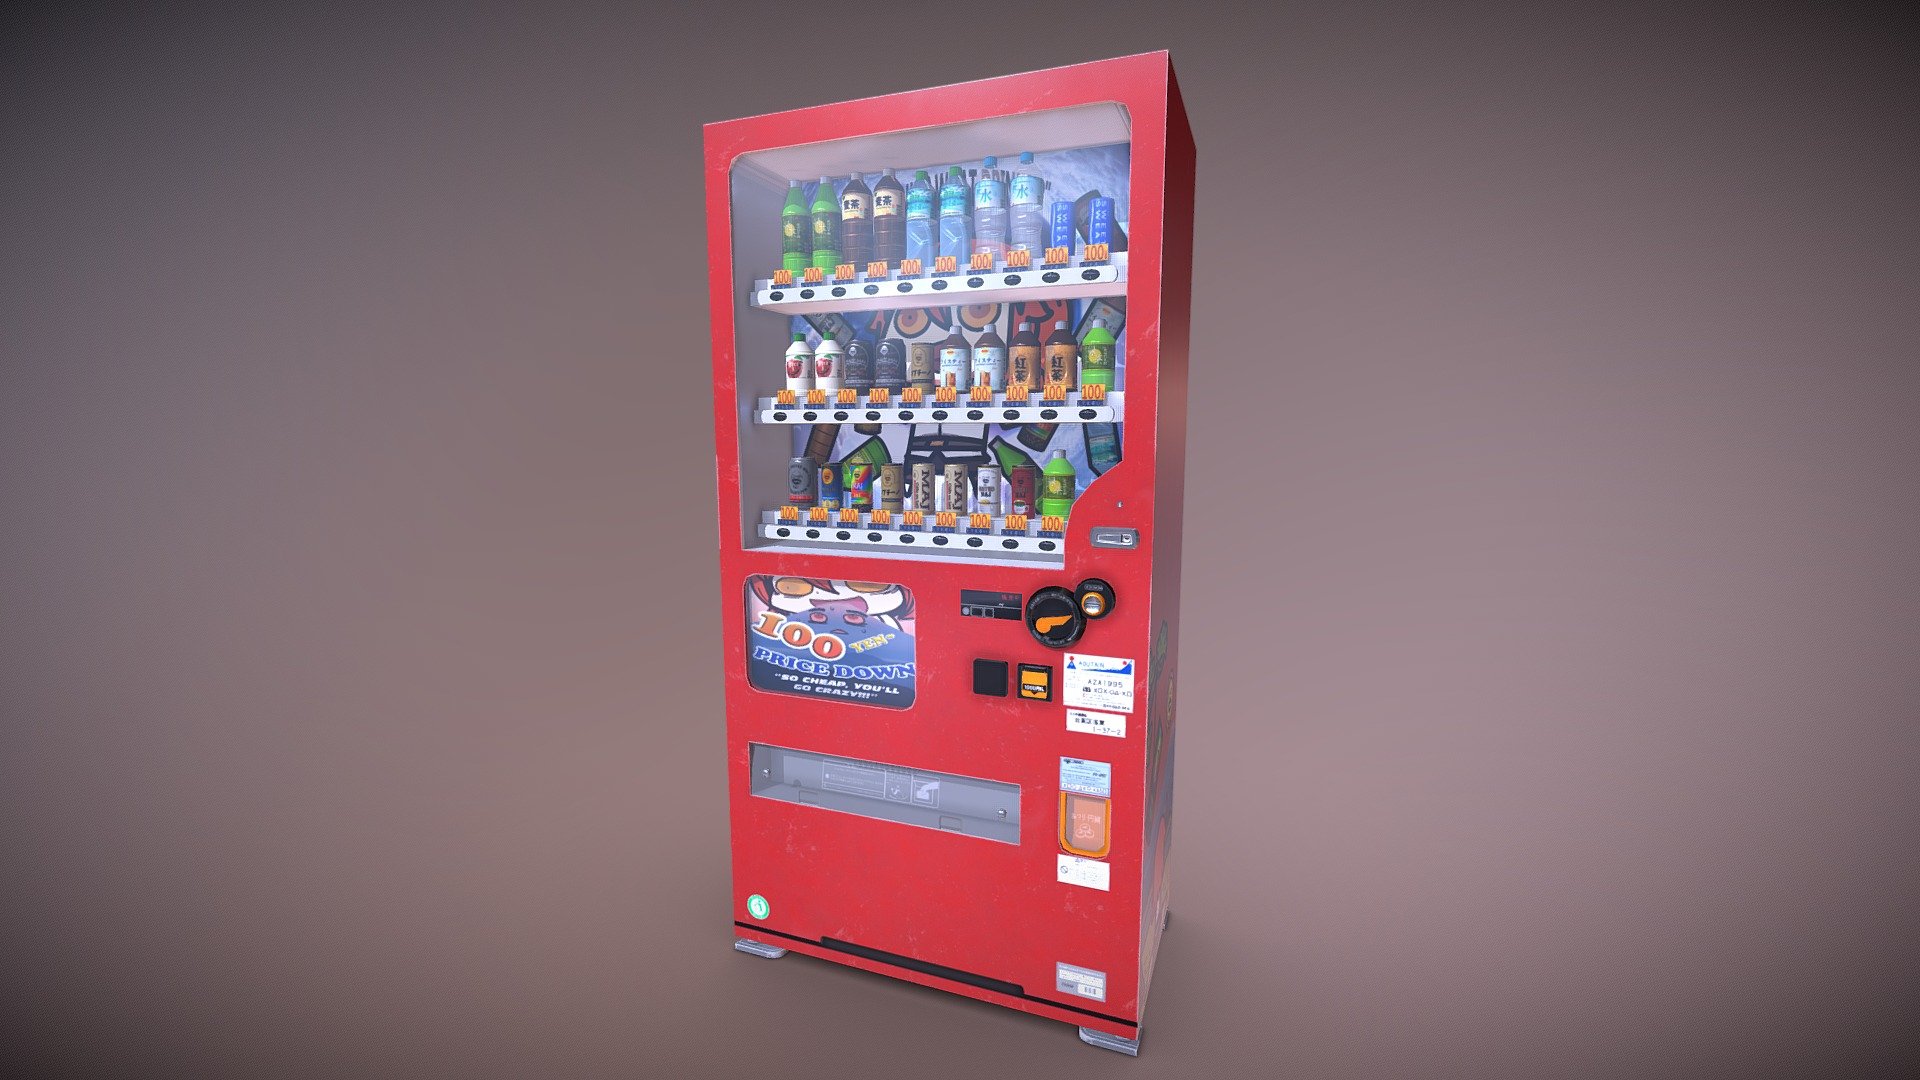 Game ready asset. Part of Japanese street corner I am working on.
Made fake brands on the beverages and decided to theme the vending machine after Fate GO Gudako character art by Riyo 3d model